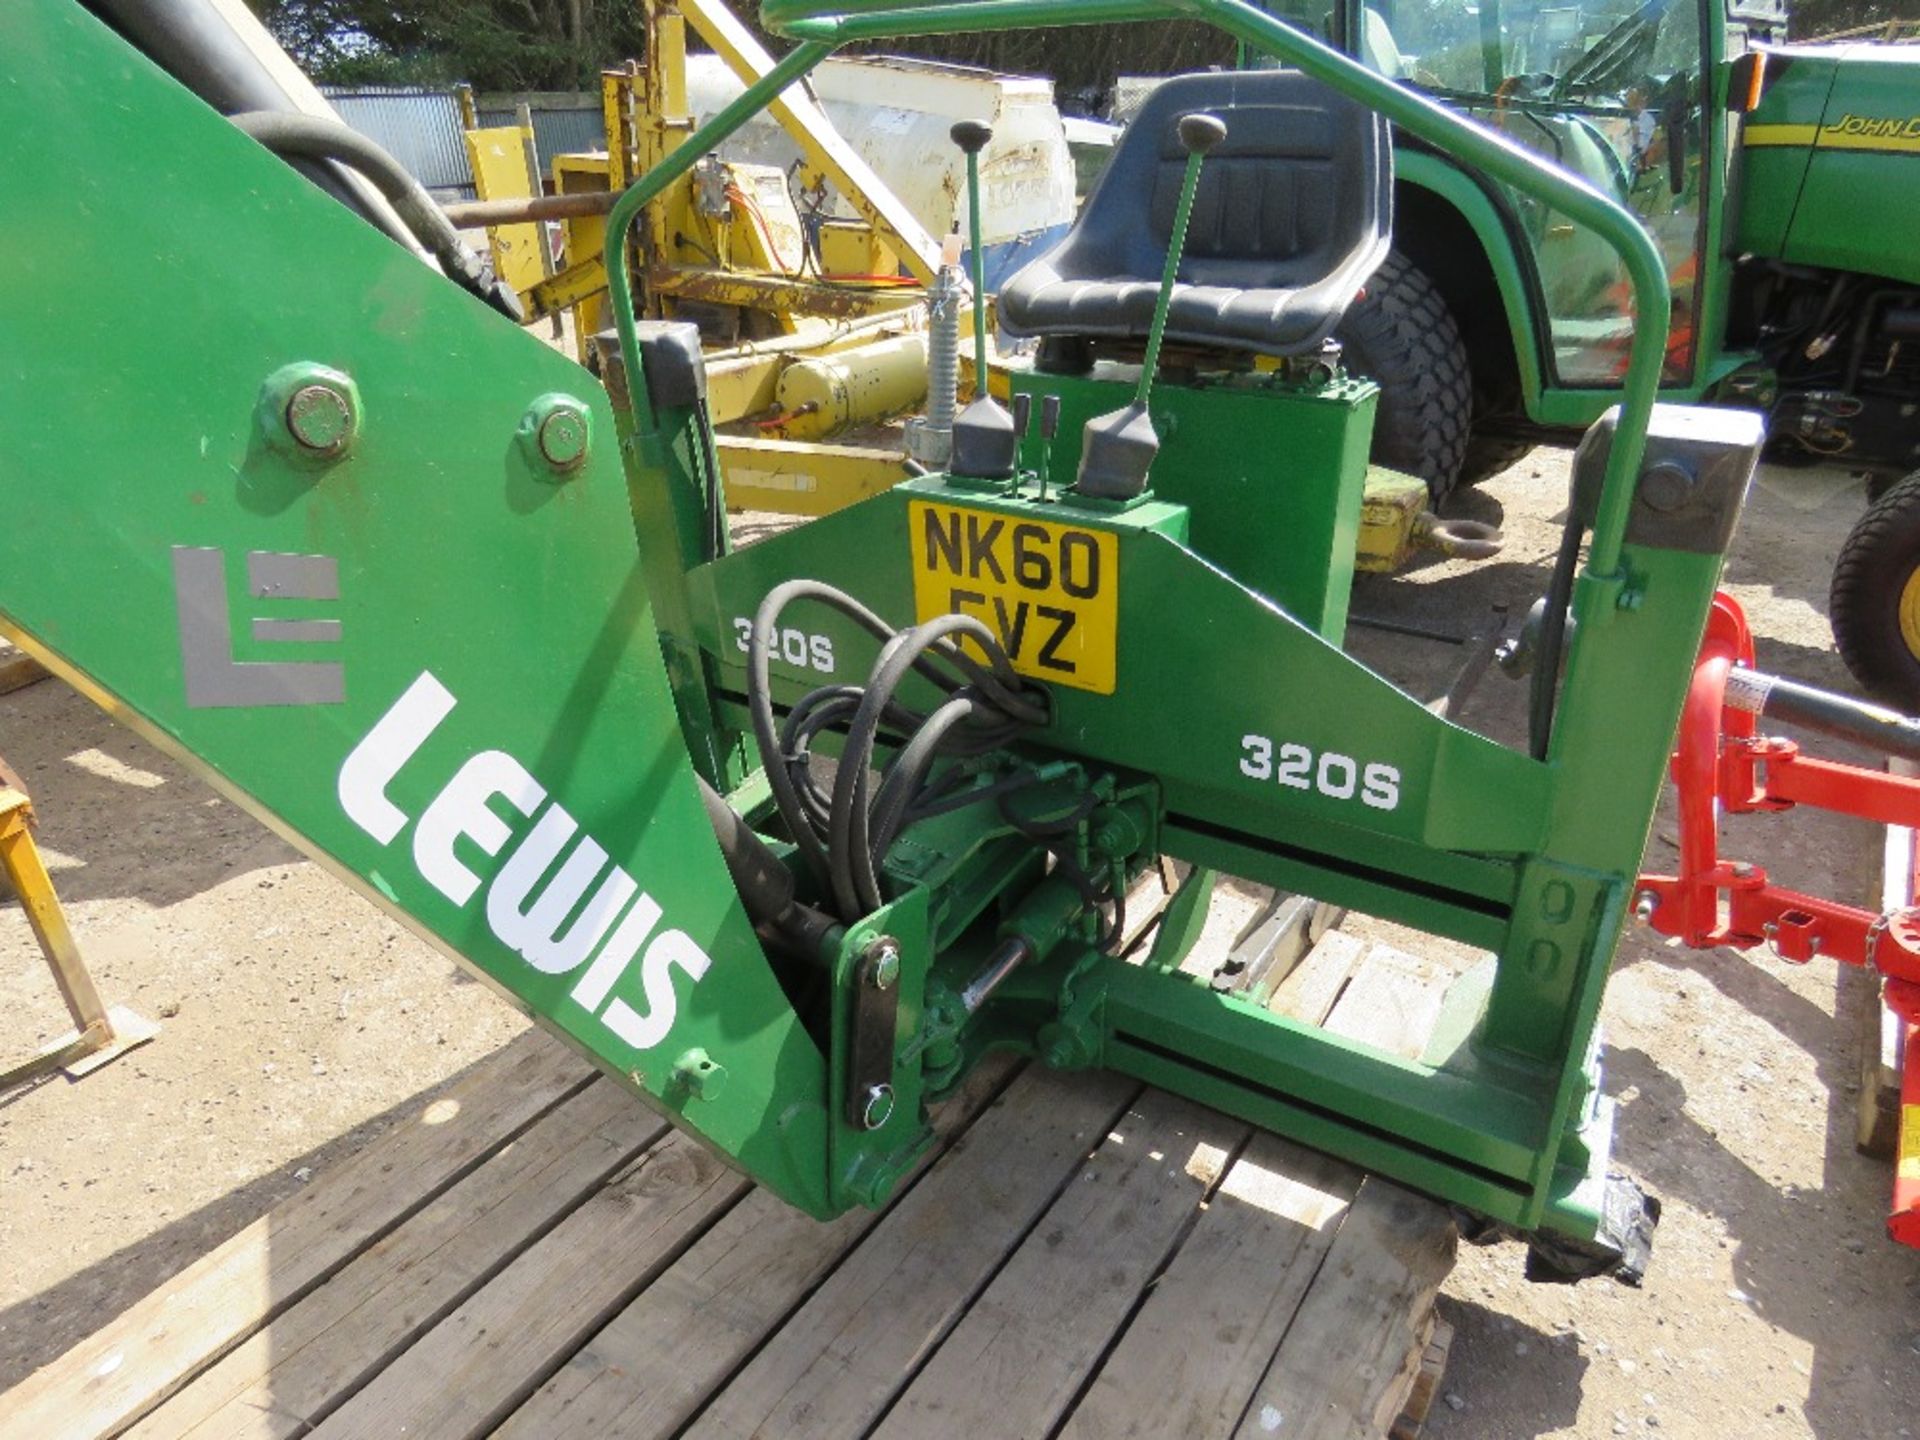 LEWIS 320S BACK HOE ATTATCHMENT FOR TRACTOR, PREVIOUSLY FITTED ON A JOHN DEERE 3520 TRACTOR - Image 4 of 4